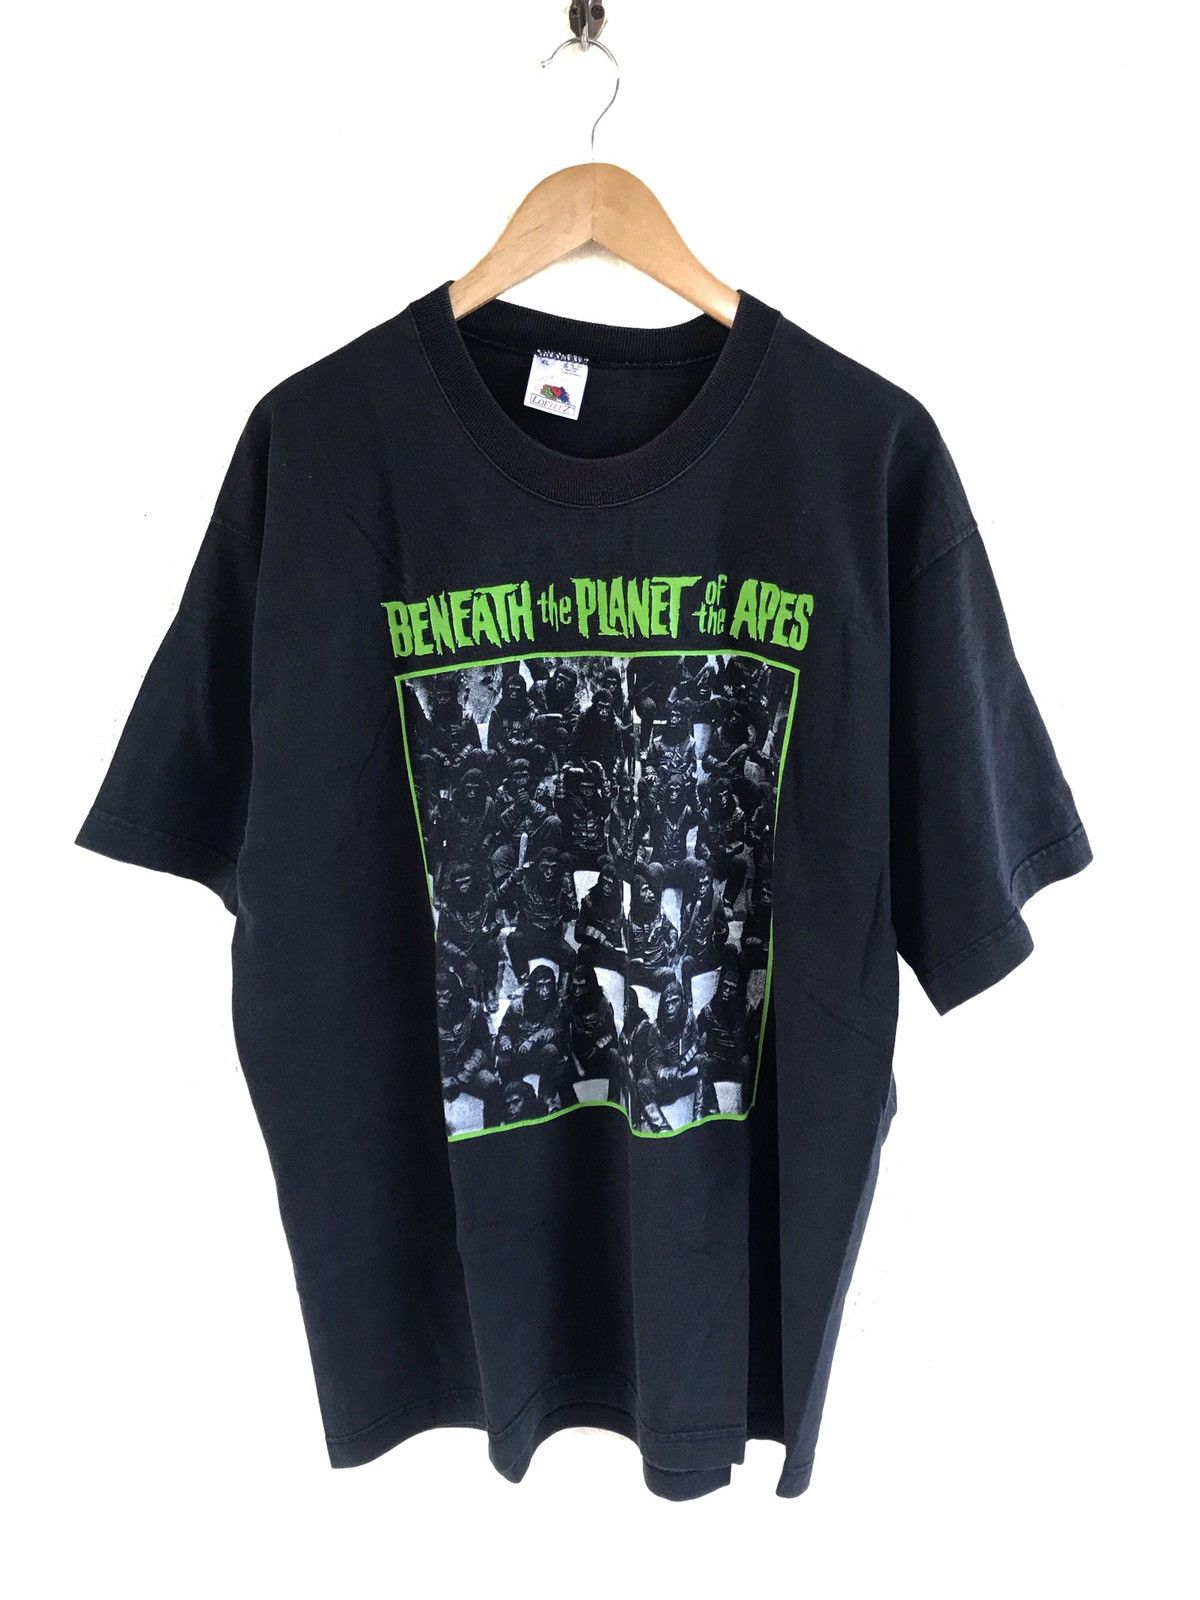 Vintage Beneath The Planet of The Apes Tshirt - 1